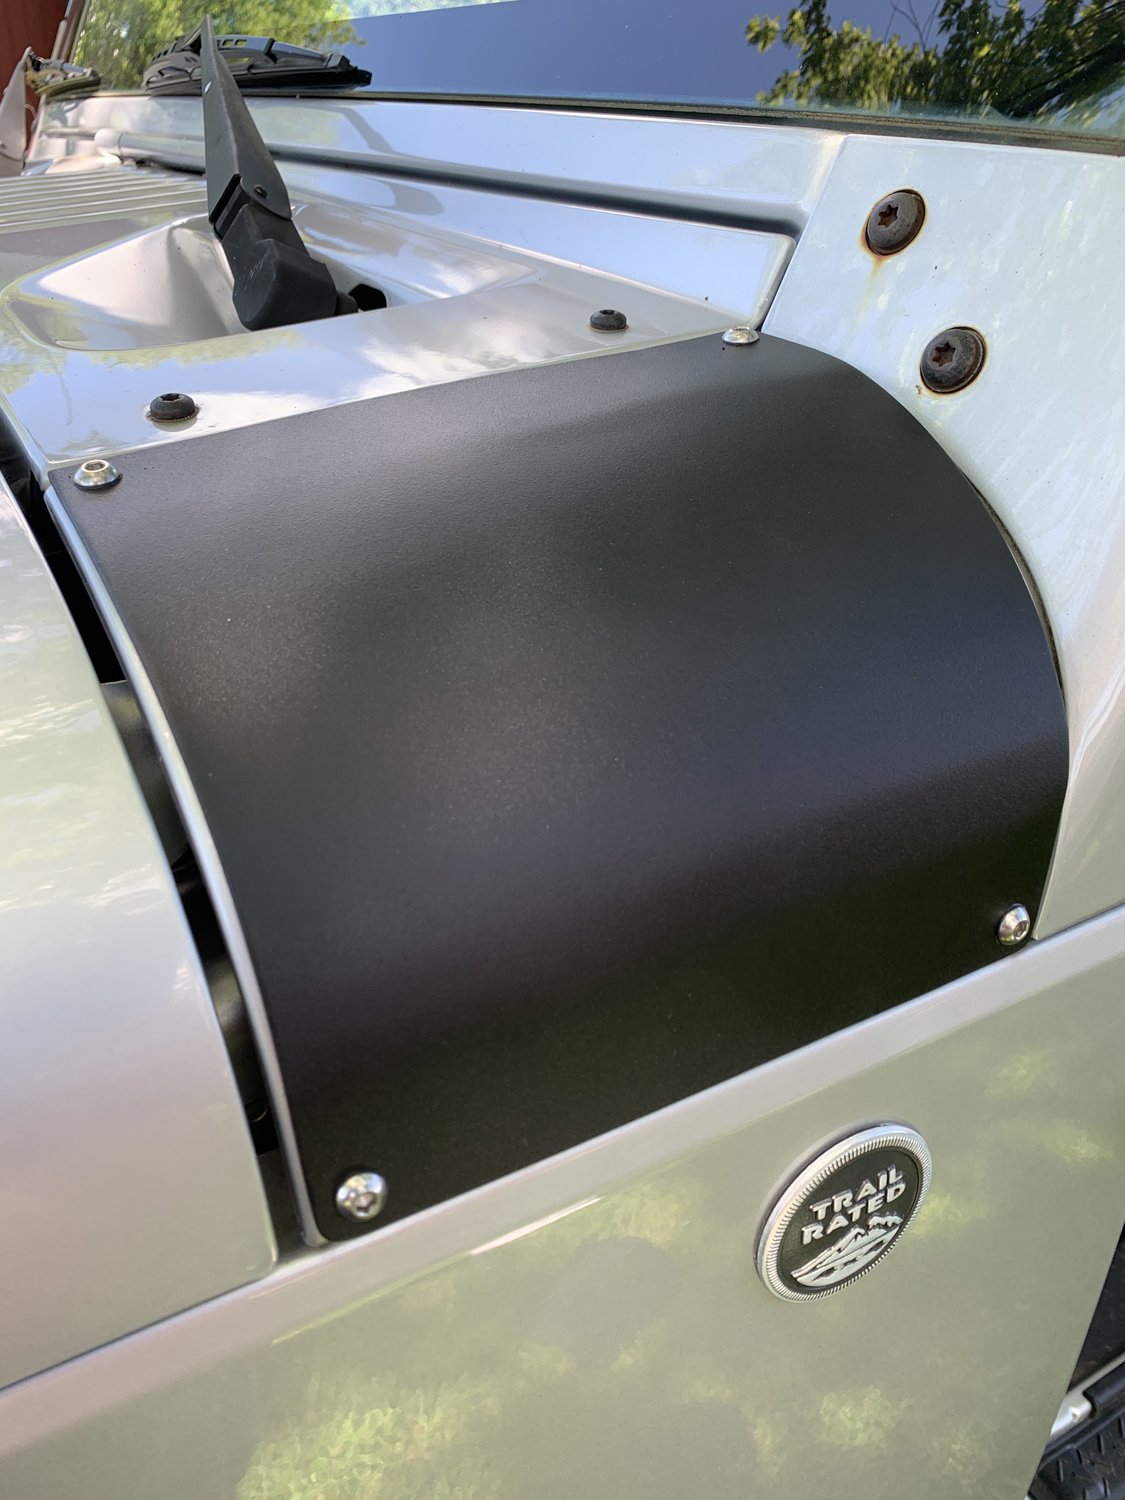 Warrior Products Outer Cowl Covers for 0718 Jeep Wrangler JK Quadratec